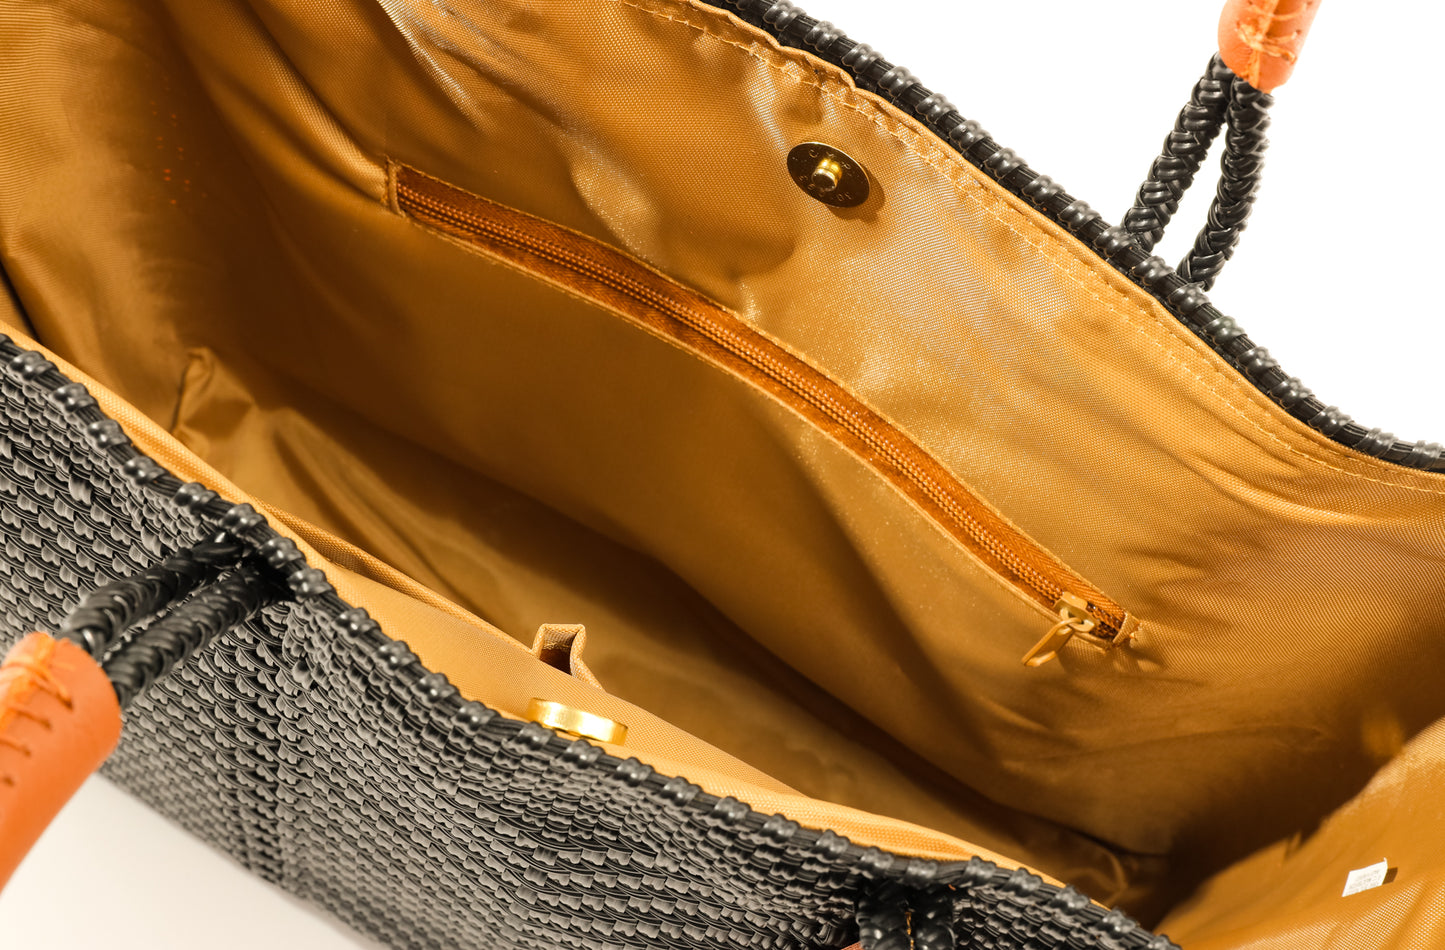 Inside tan lining with zipper pocket and magnetic closure of Black and brown woven bucket bag made from recycled plastics 